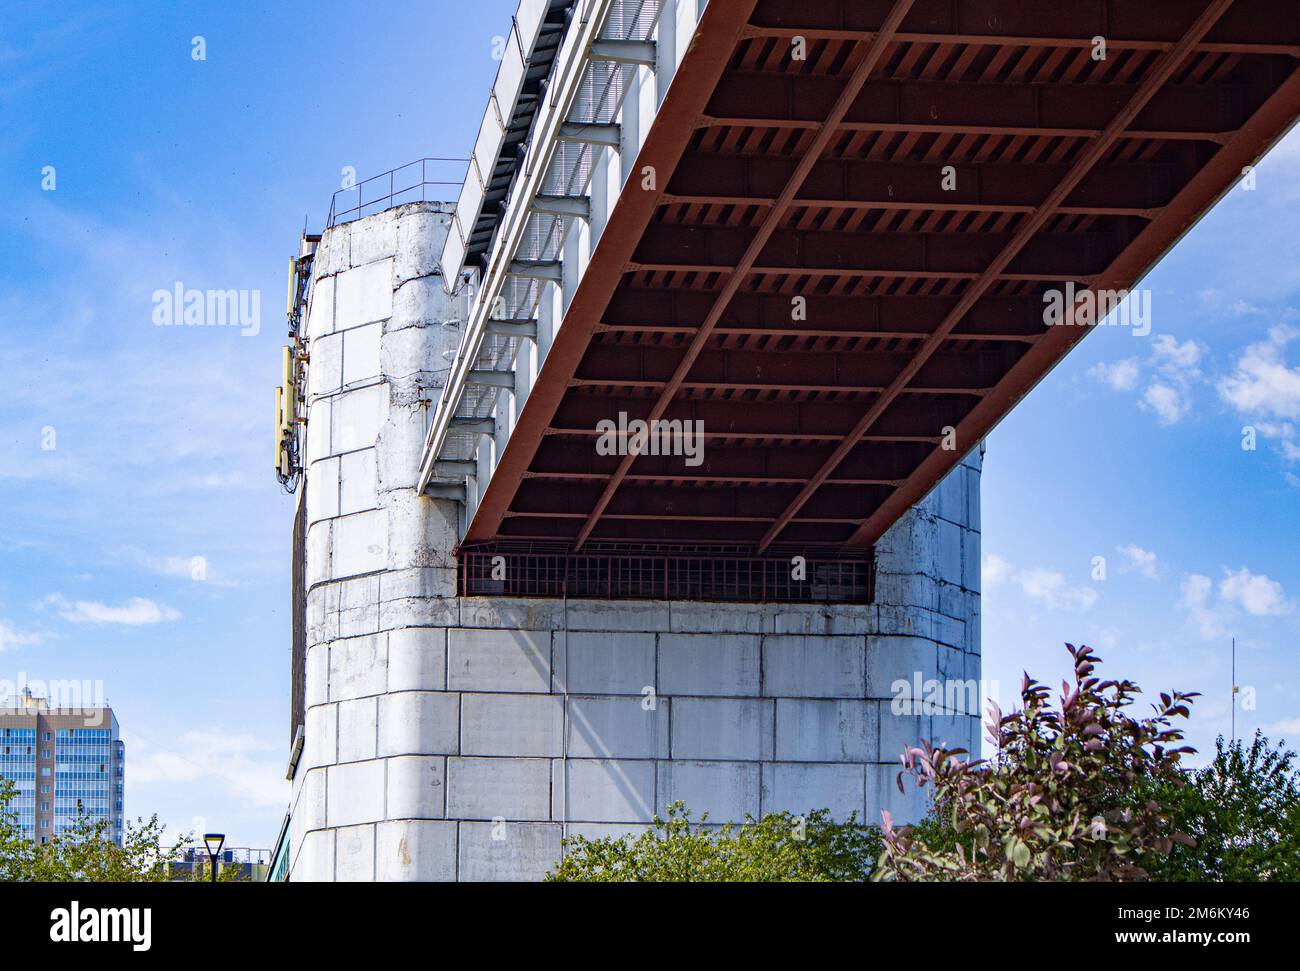 Engineering design of the metro bridge with concrete supports, bottom view. Panorama of the city with sky and trees Stock Photo